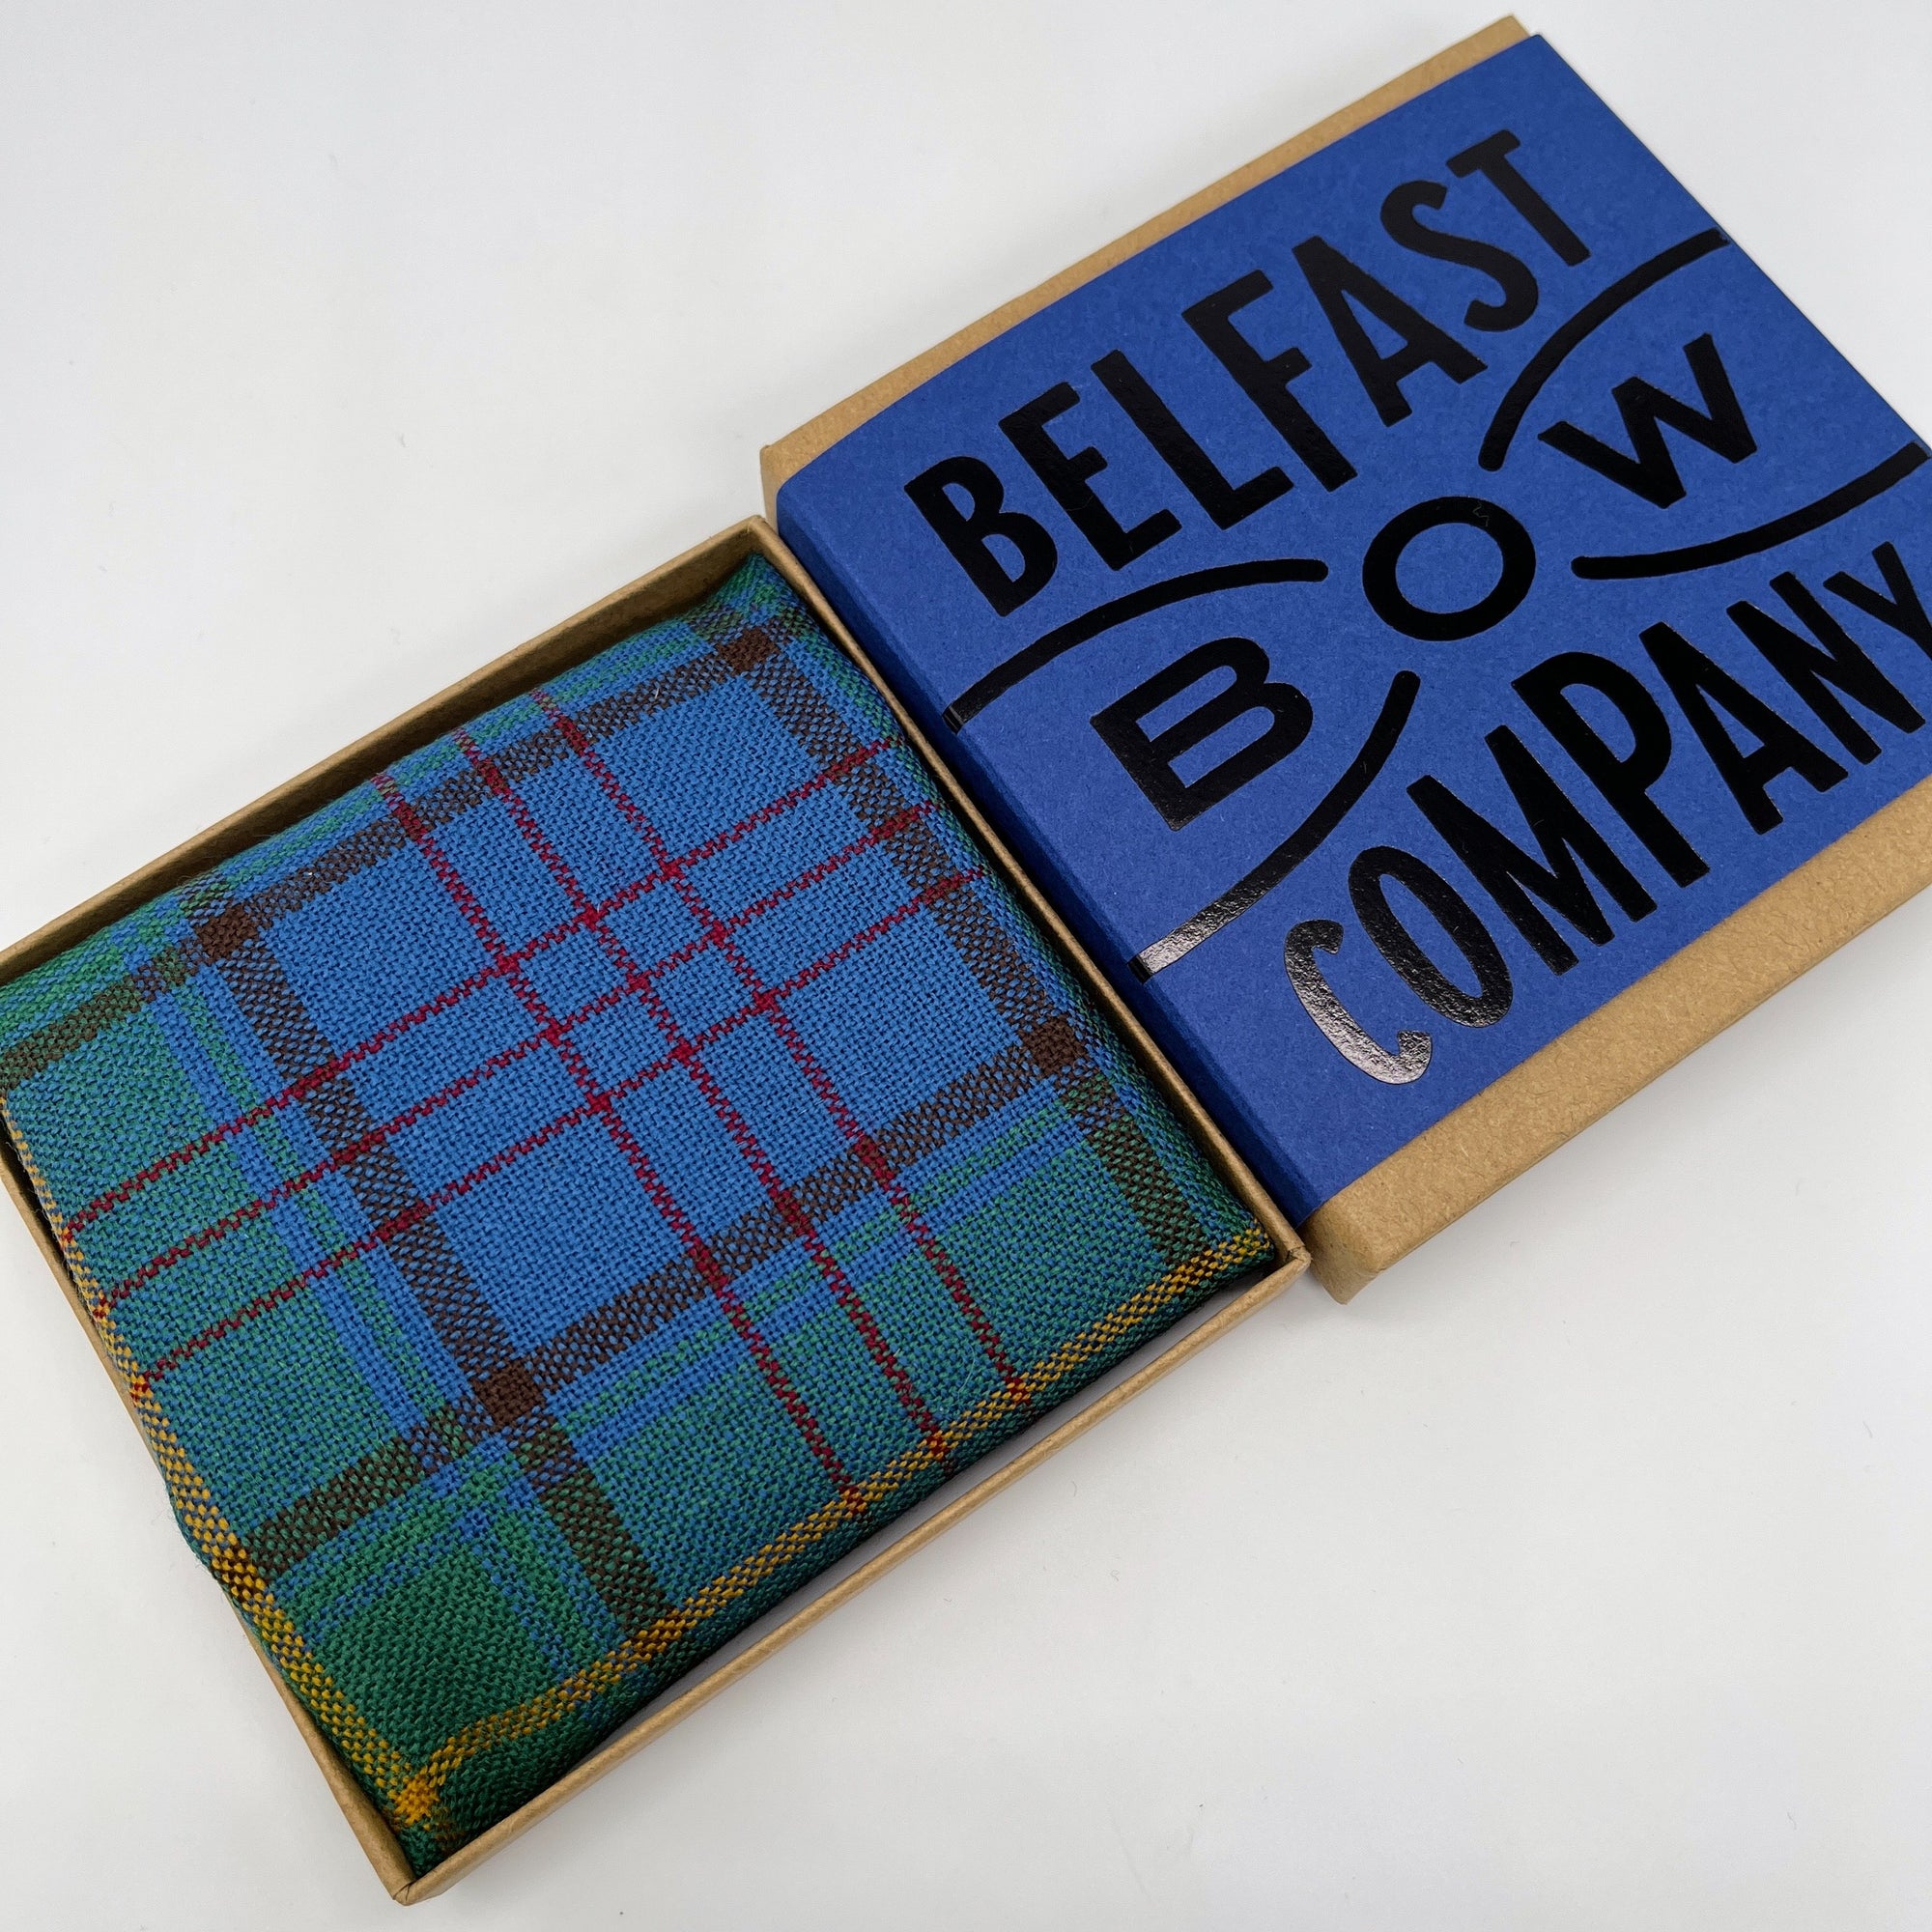 County Donegal Tartan Pocket Square by the Belfast Bow Company